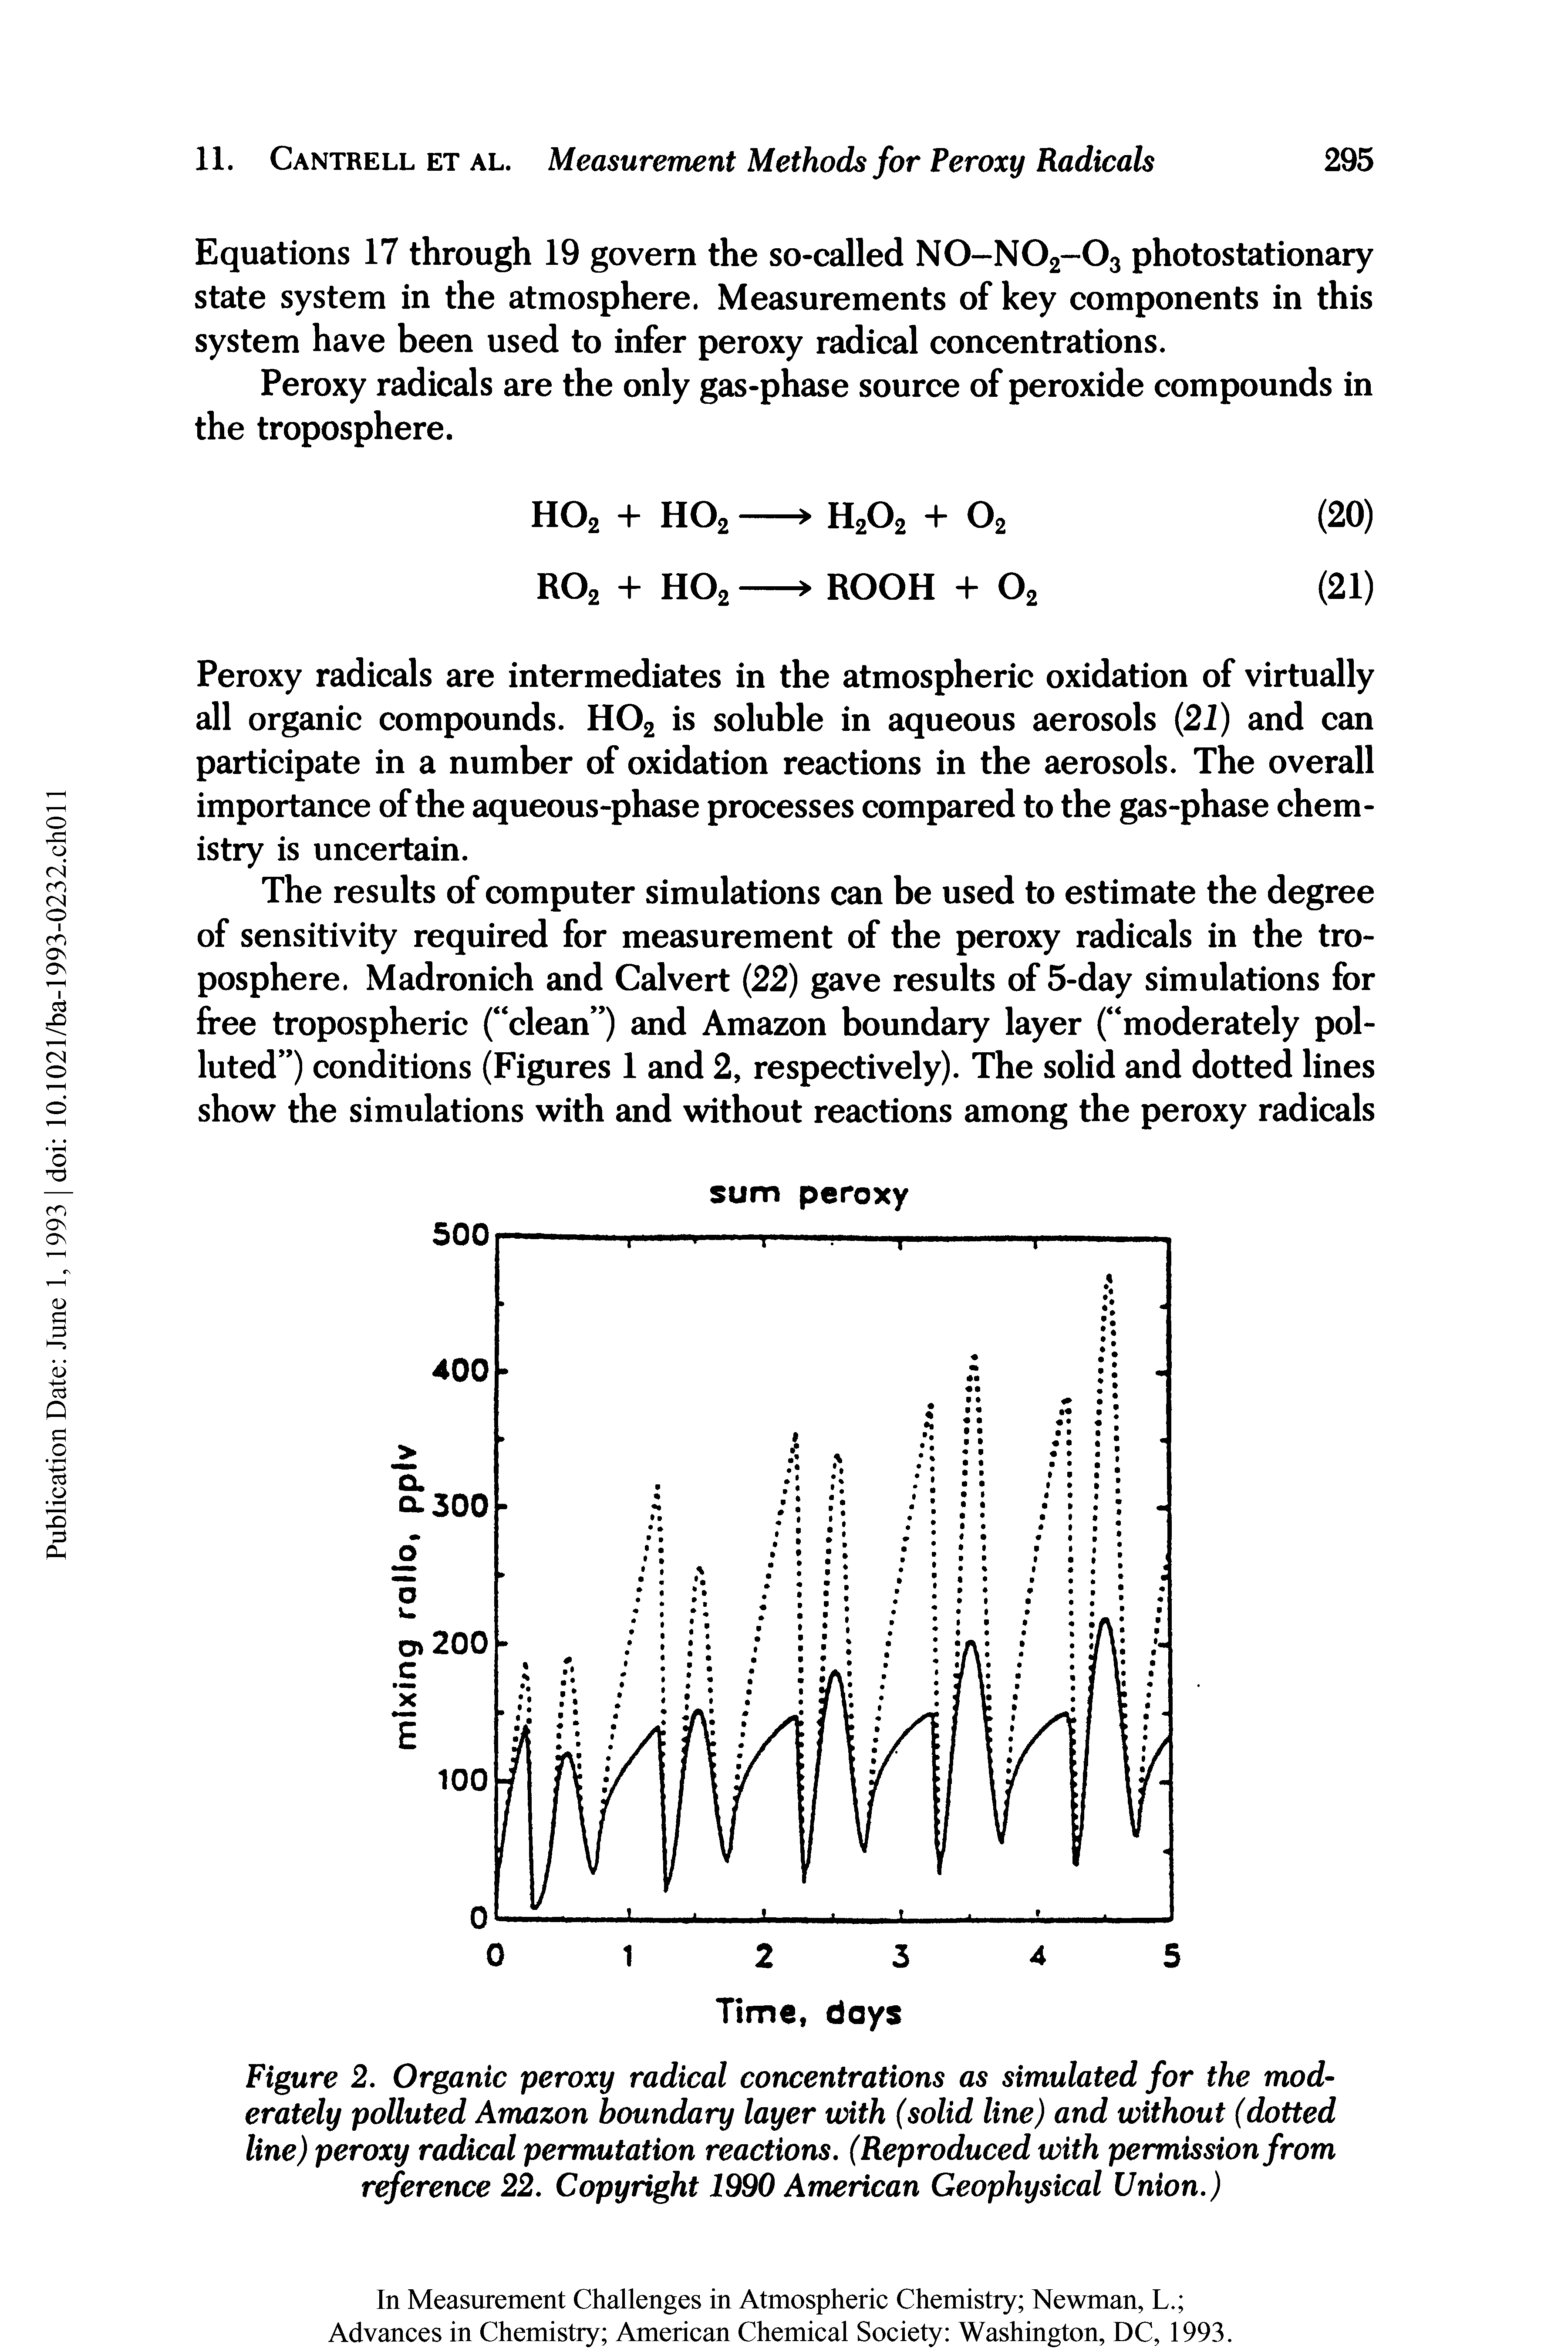 Figure 2. Organic peroxy radical concentrations as simulated for the moderately polluted Amazon boundary layer with (solid line) and without (dotted line) peroxy radical permutation reactions. (Reproduced with permission from reference 22. Copyright 1990 American Geophysical Union.)...